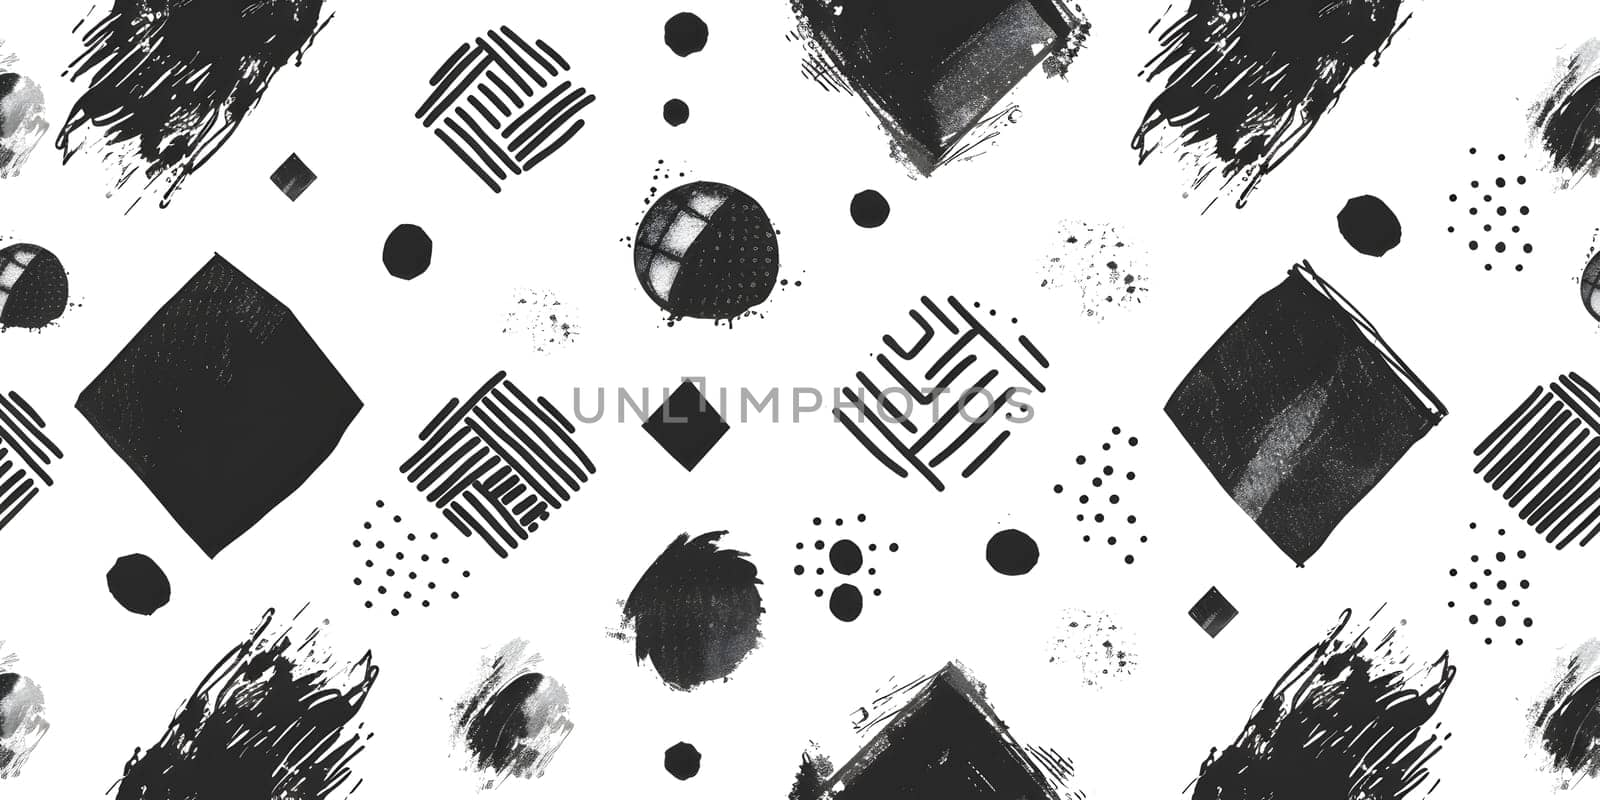 Monochrome pattern of black and white squares and circles on a white background by Nadtochiy